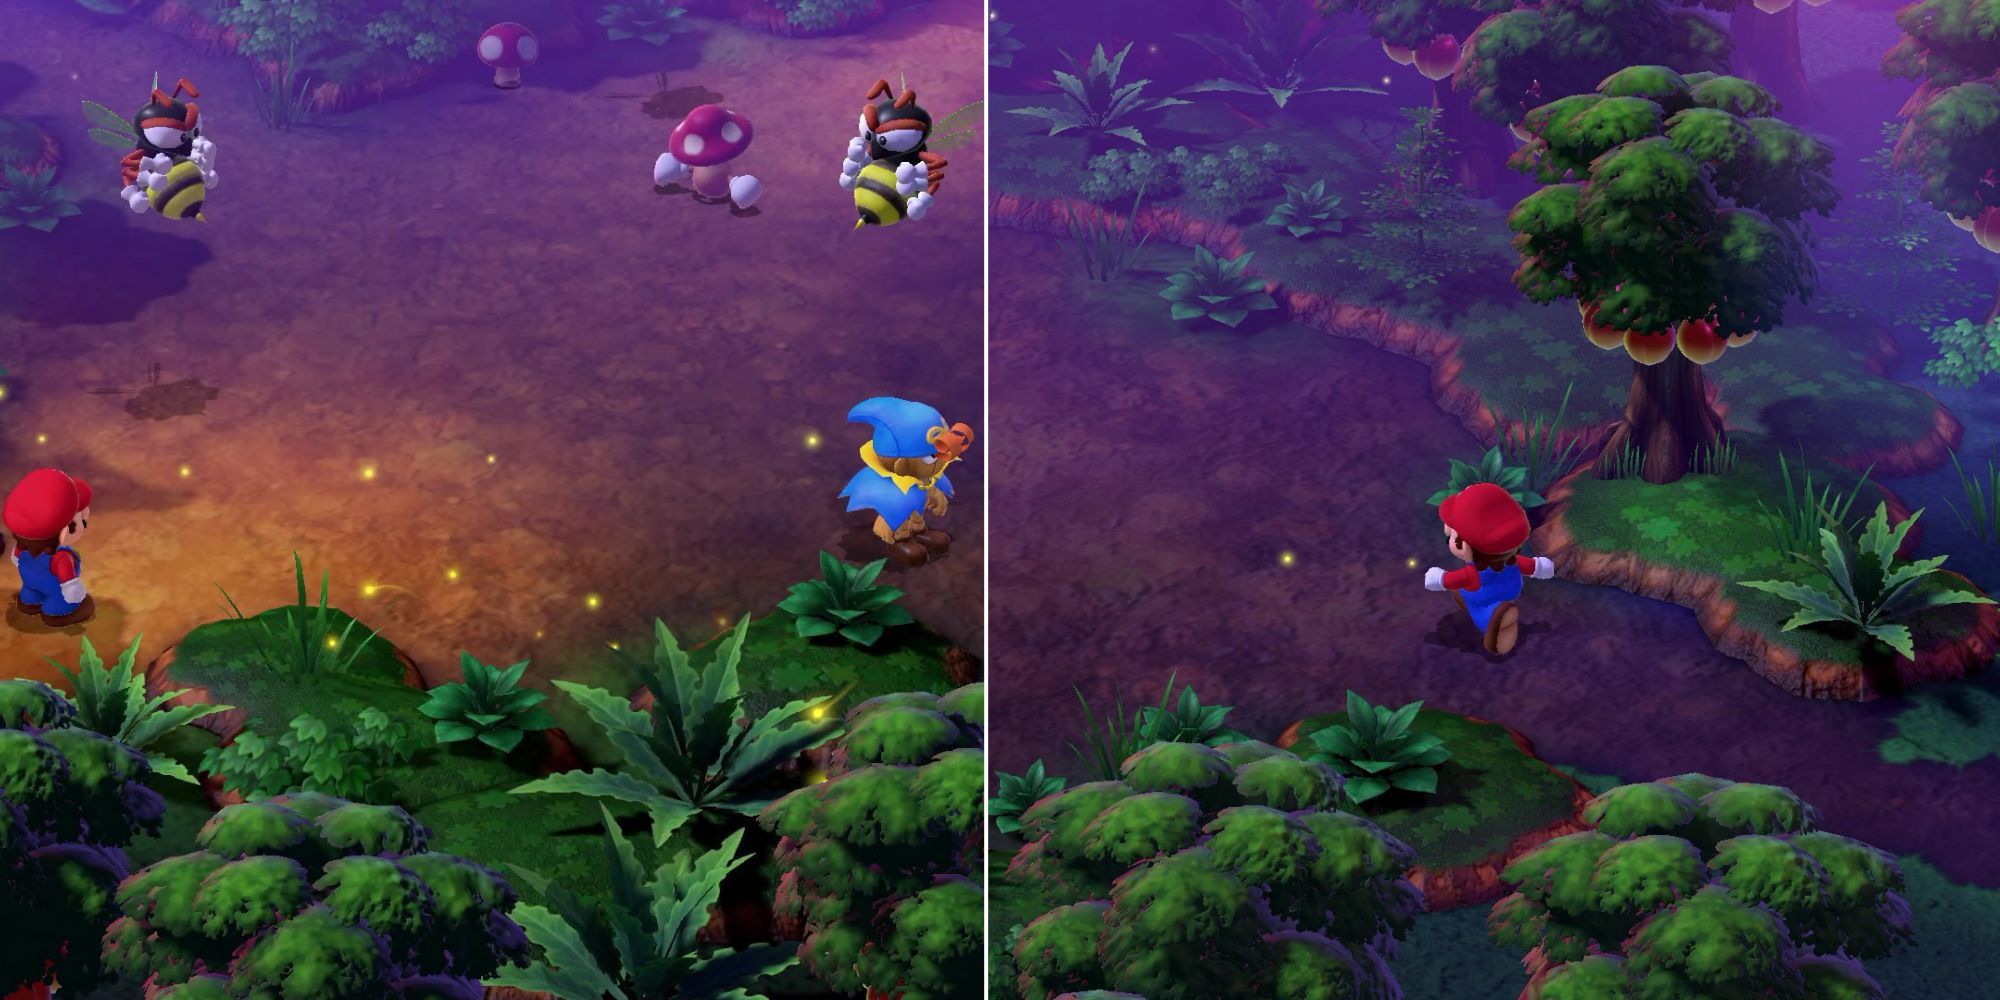 A split image of the Forest Maze from Super Mario RPG